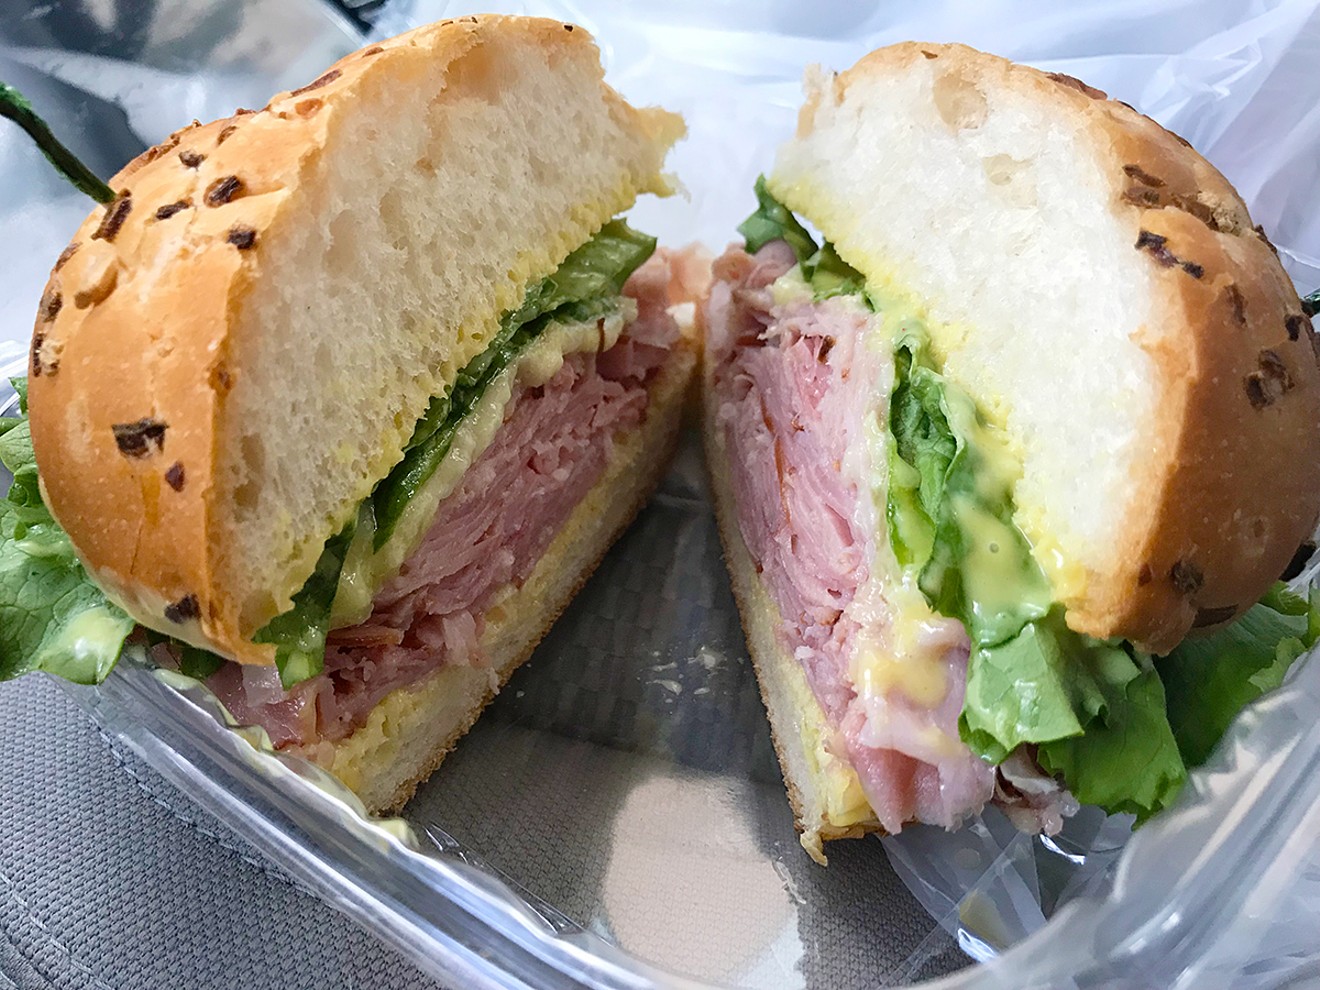 The massive honey ham and brie from Carter & Cooley Company is a warm, messy delight.